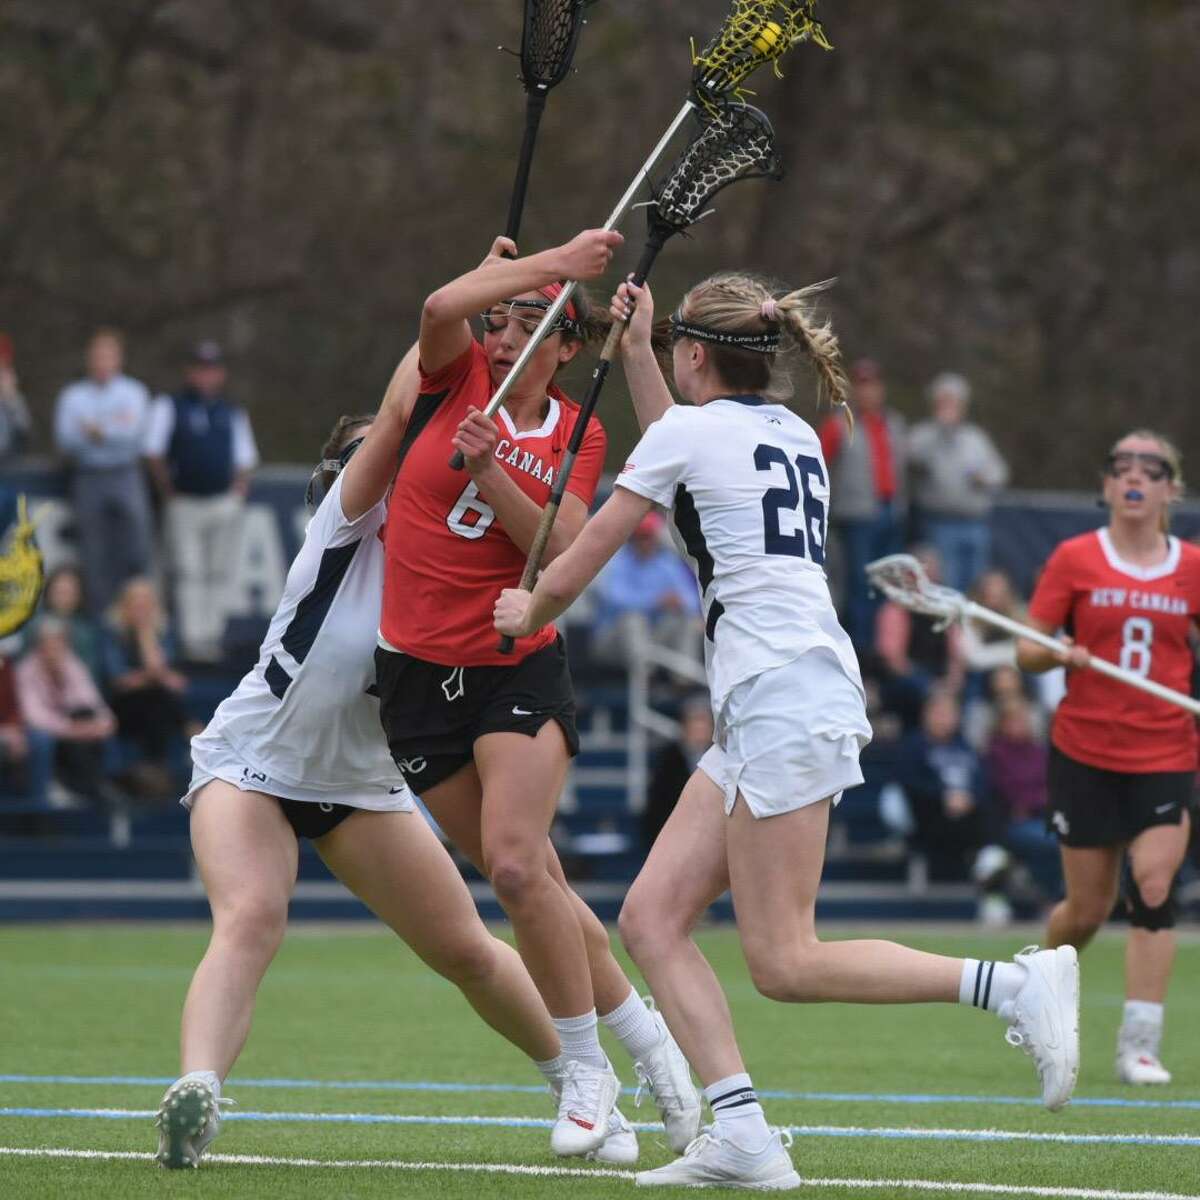 New Canaan’s Kaleigh Harden (6) tries to split a pair of Wilton defenders, including Ashleigh Masterson (26) during a girls lacrosse game on Wednesday, April 13, 2022 in Wilton, Conn.